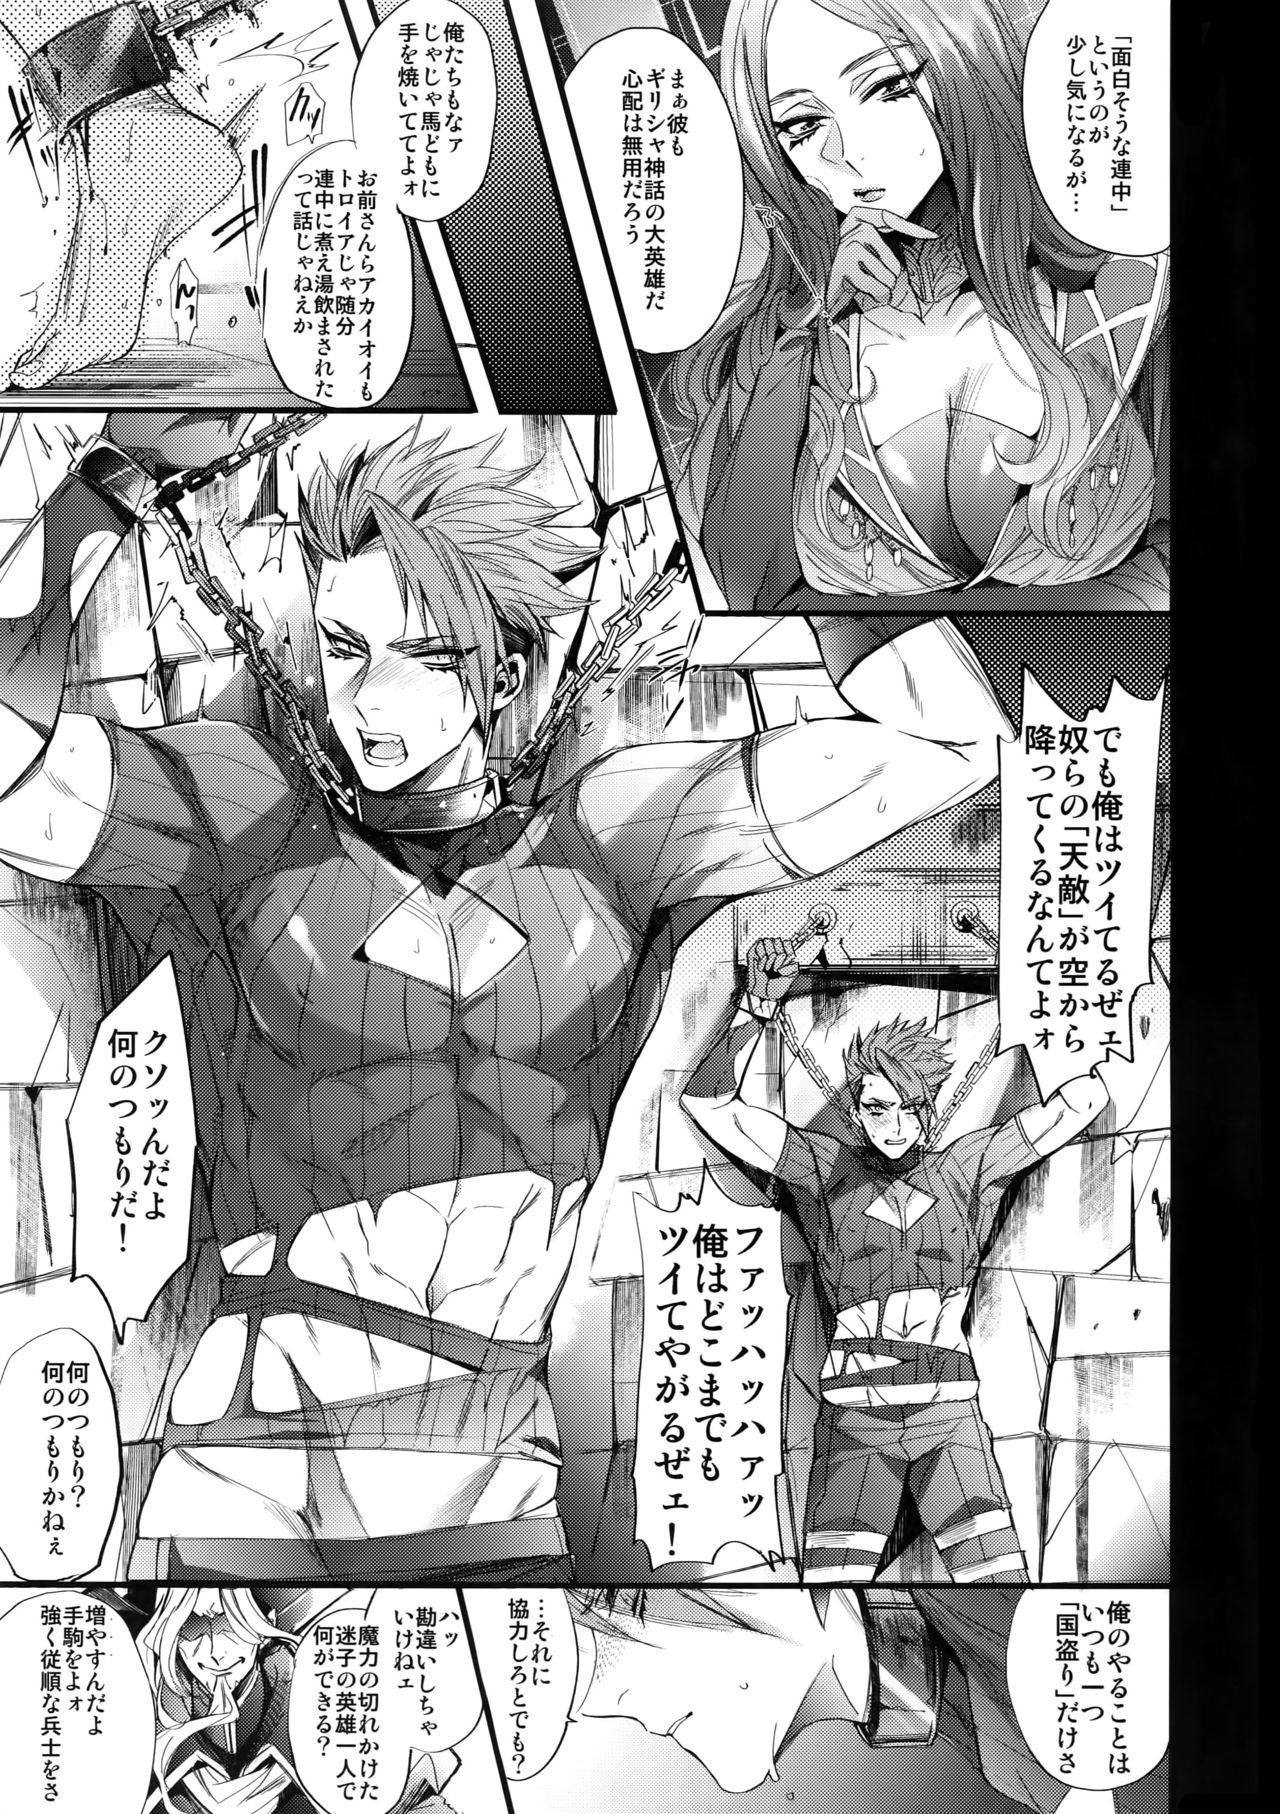 Deepthroat From Dusk Till The End - Fate grand order Outdoor - Page 4